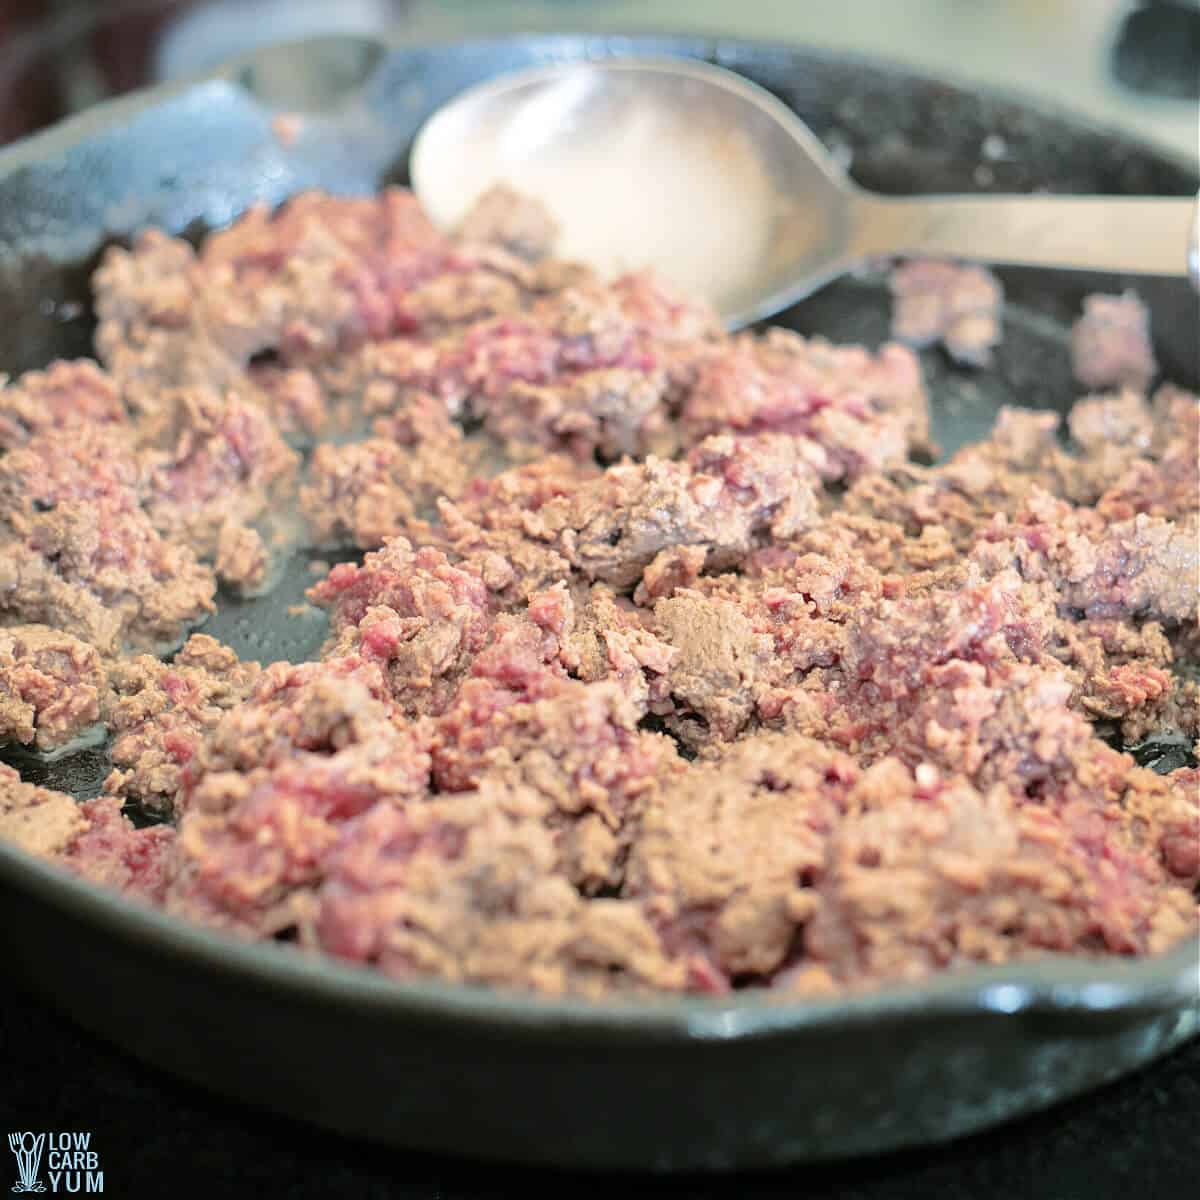 browning the ground beef in iron skillet